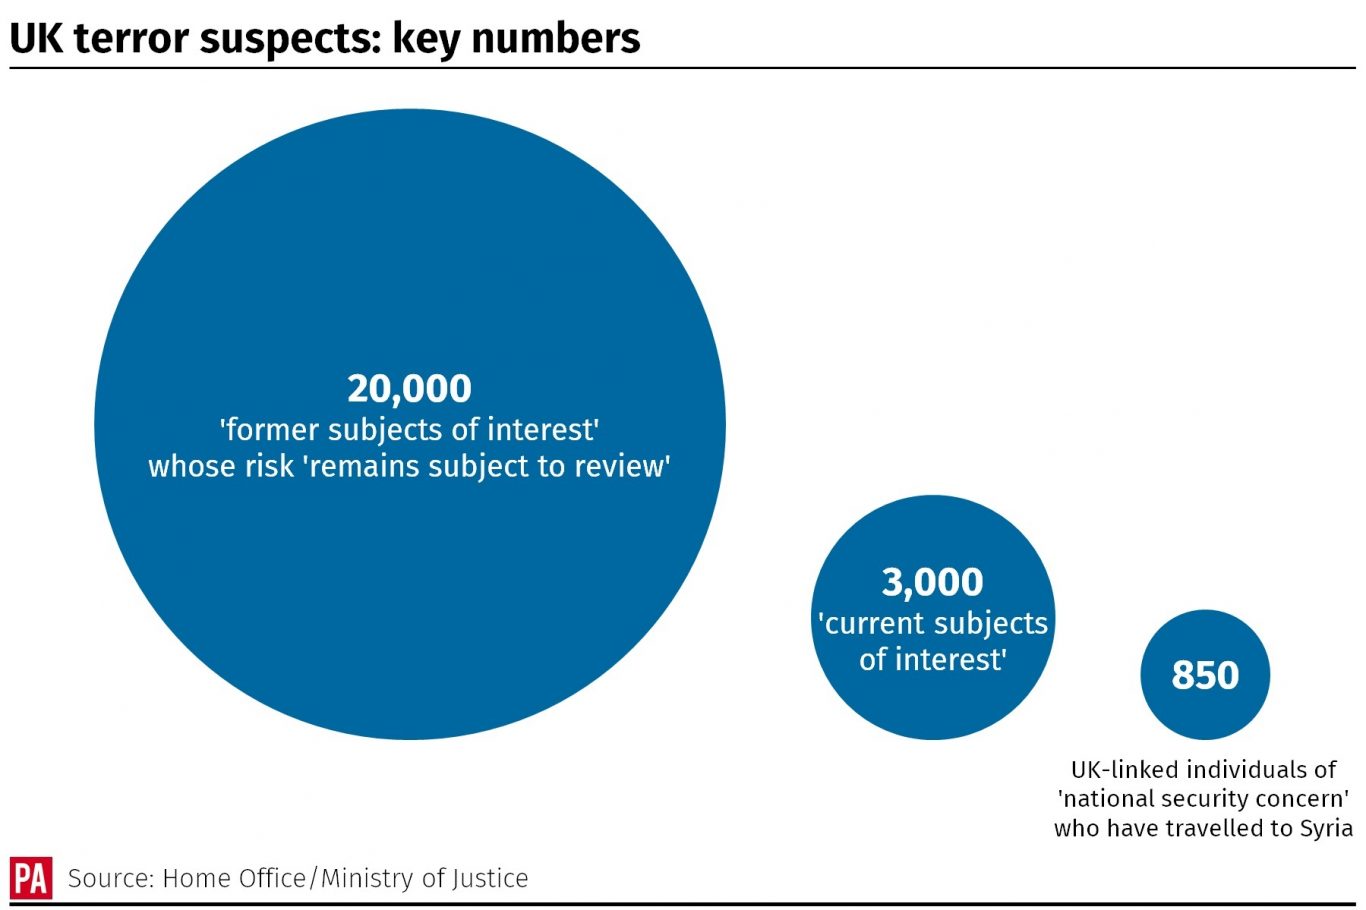 Key numbers on UK terror suspects graphic